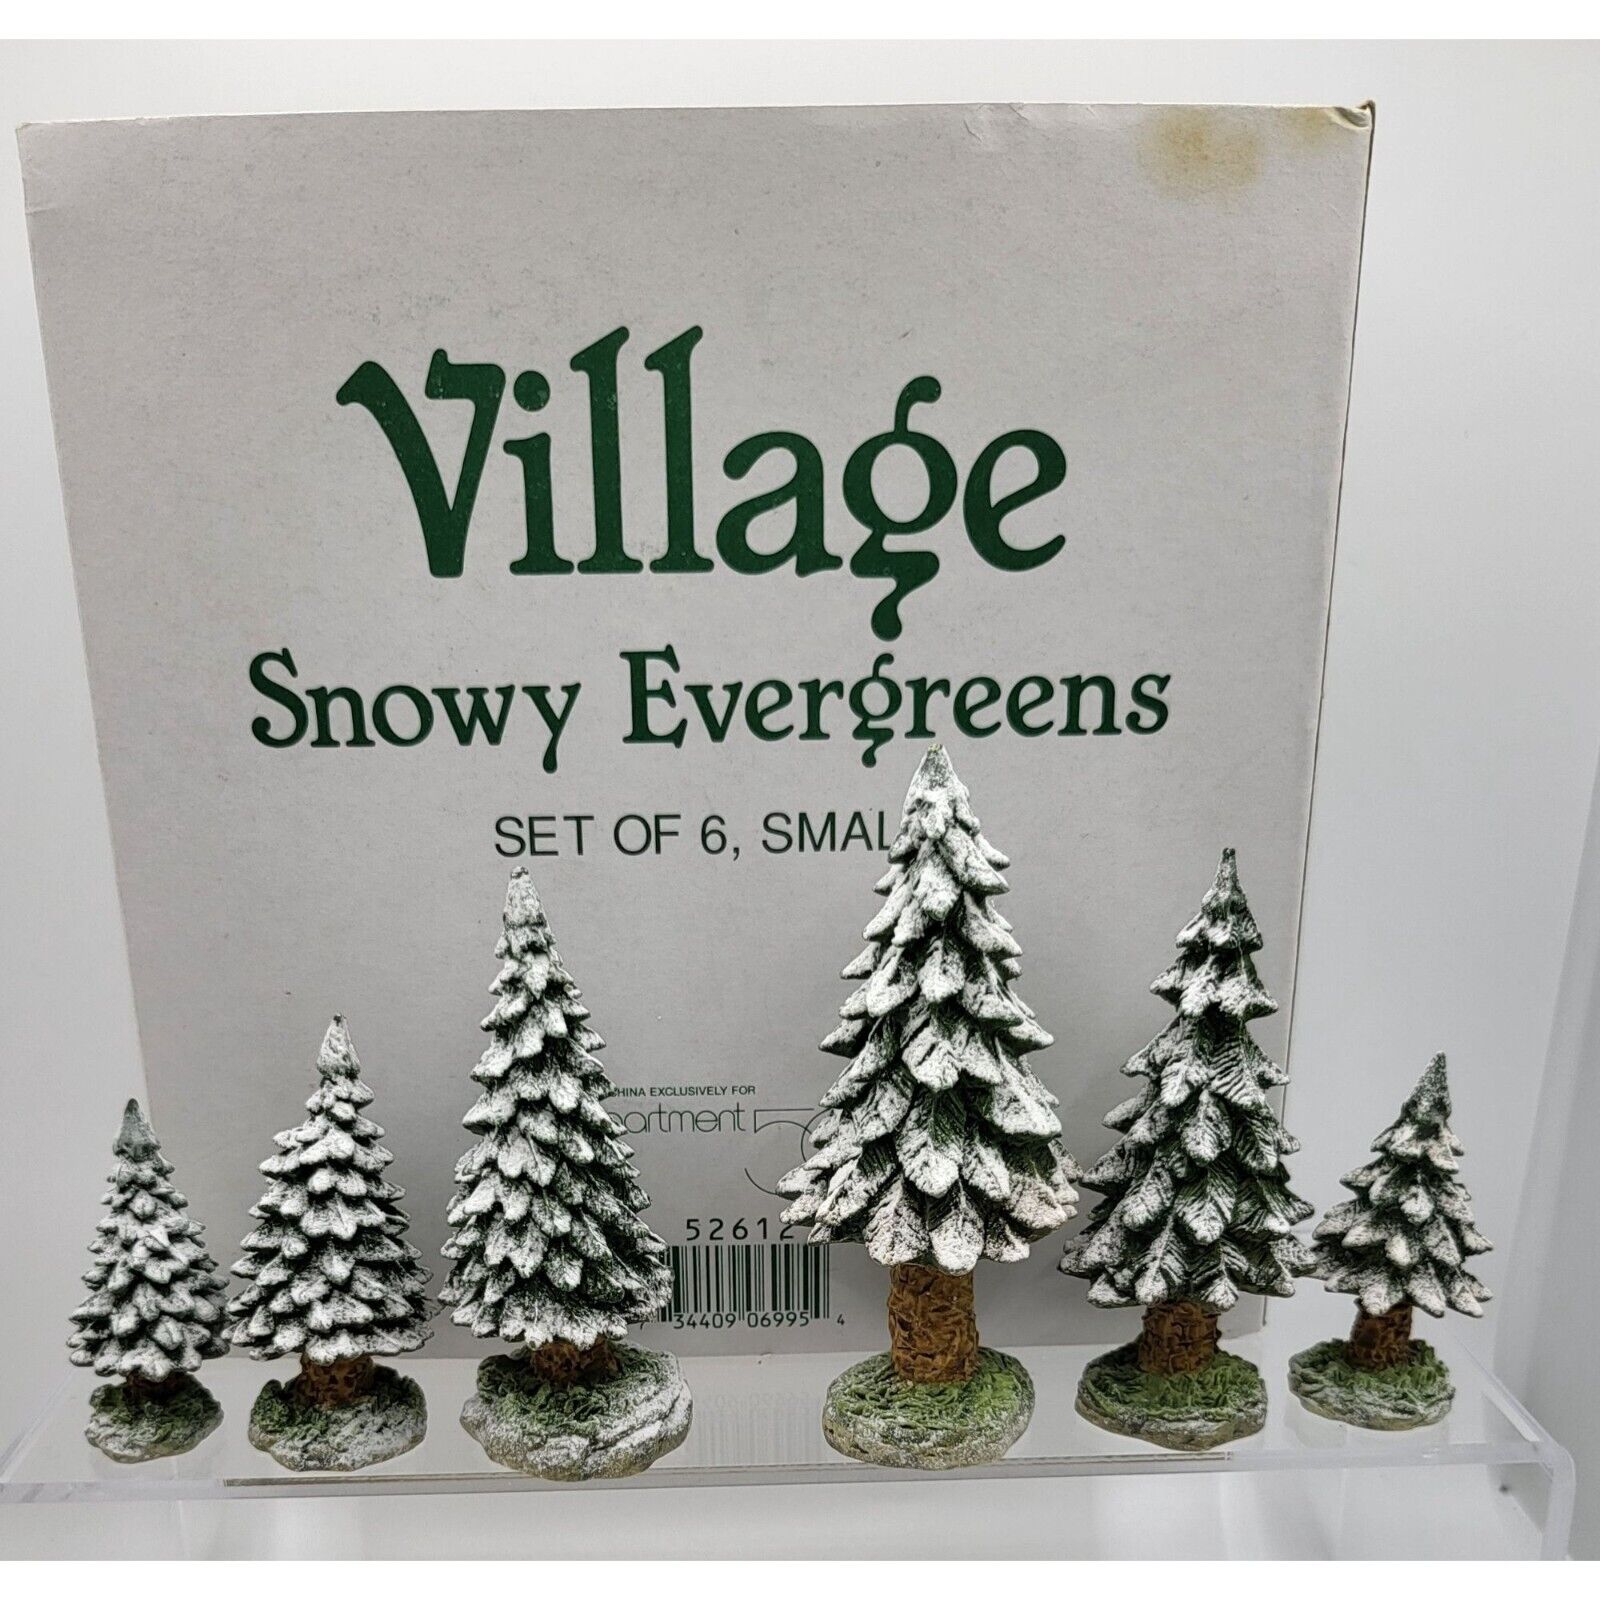 1995 Department 56 SNOWY EVERGREENS Set of 6 Small Village Accessories Retired